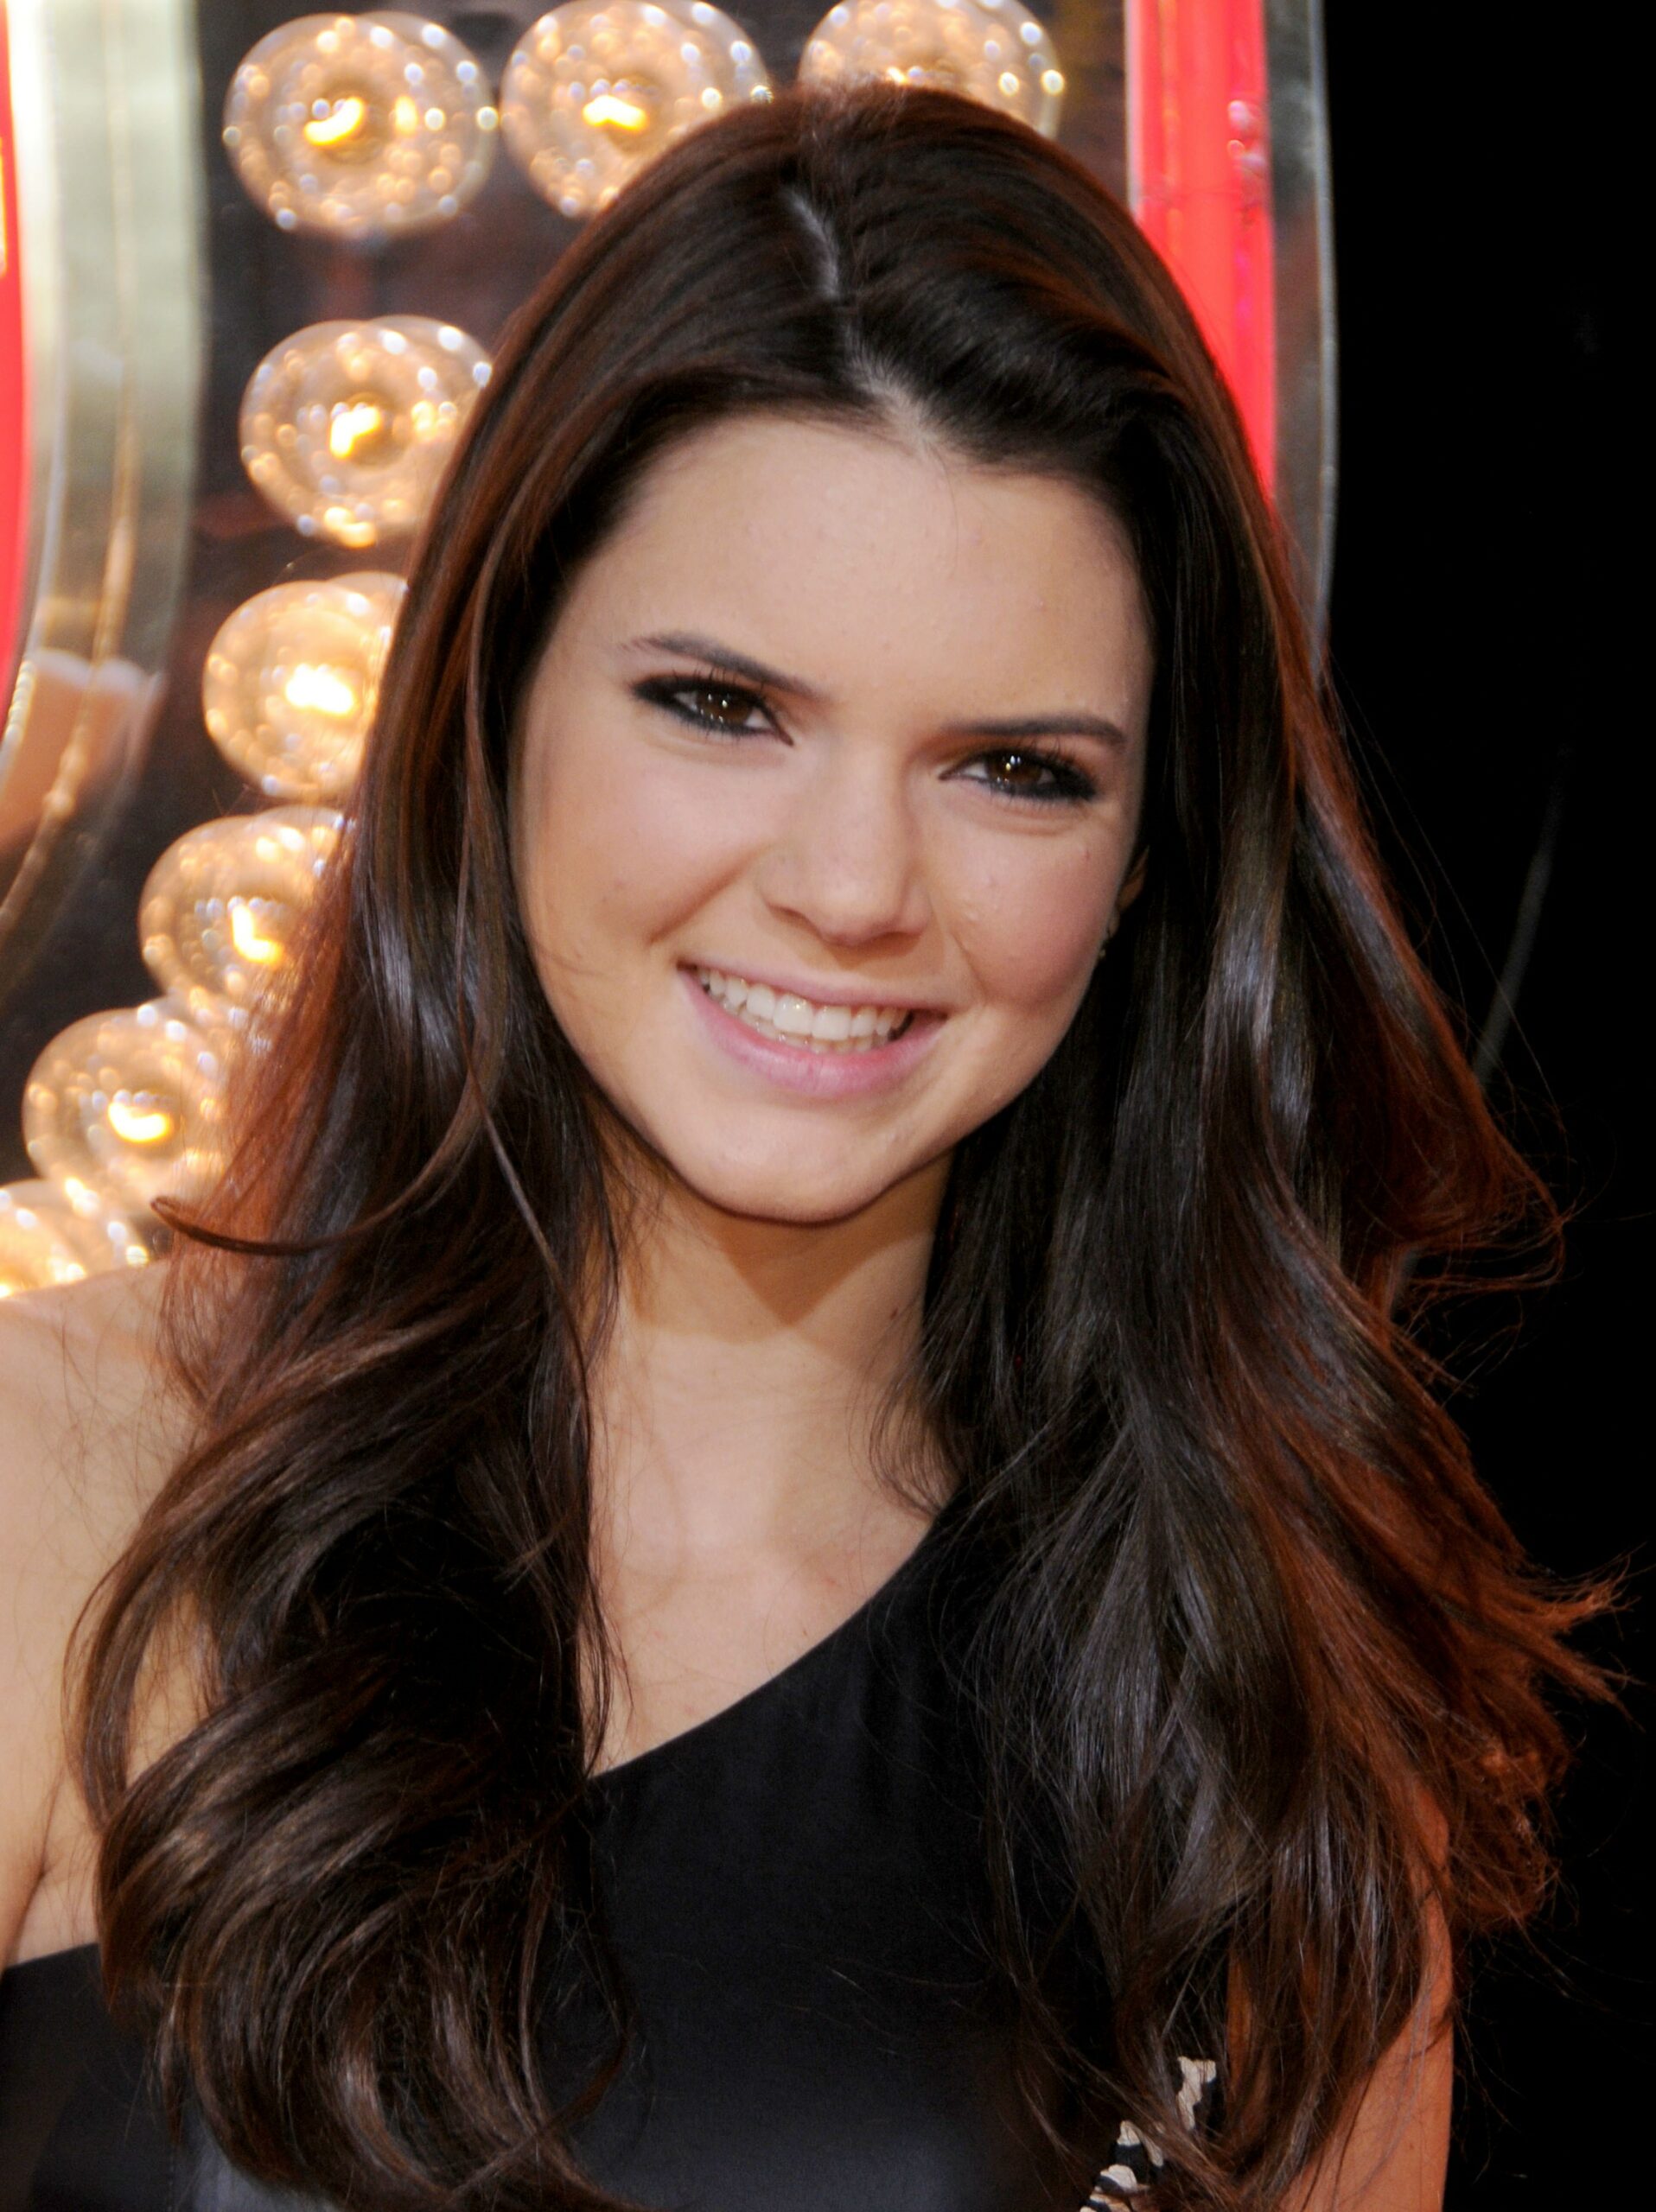 Kendall Jenner in 2010